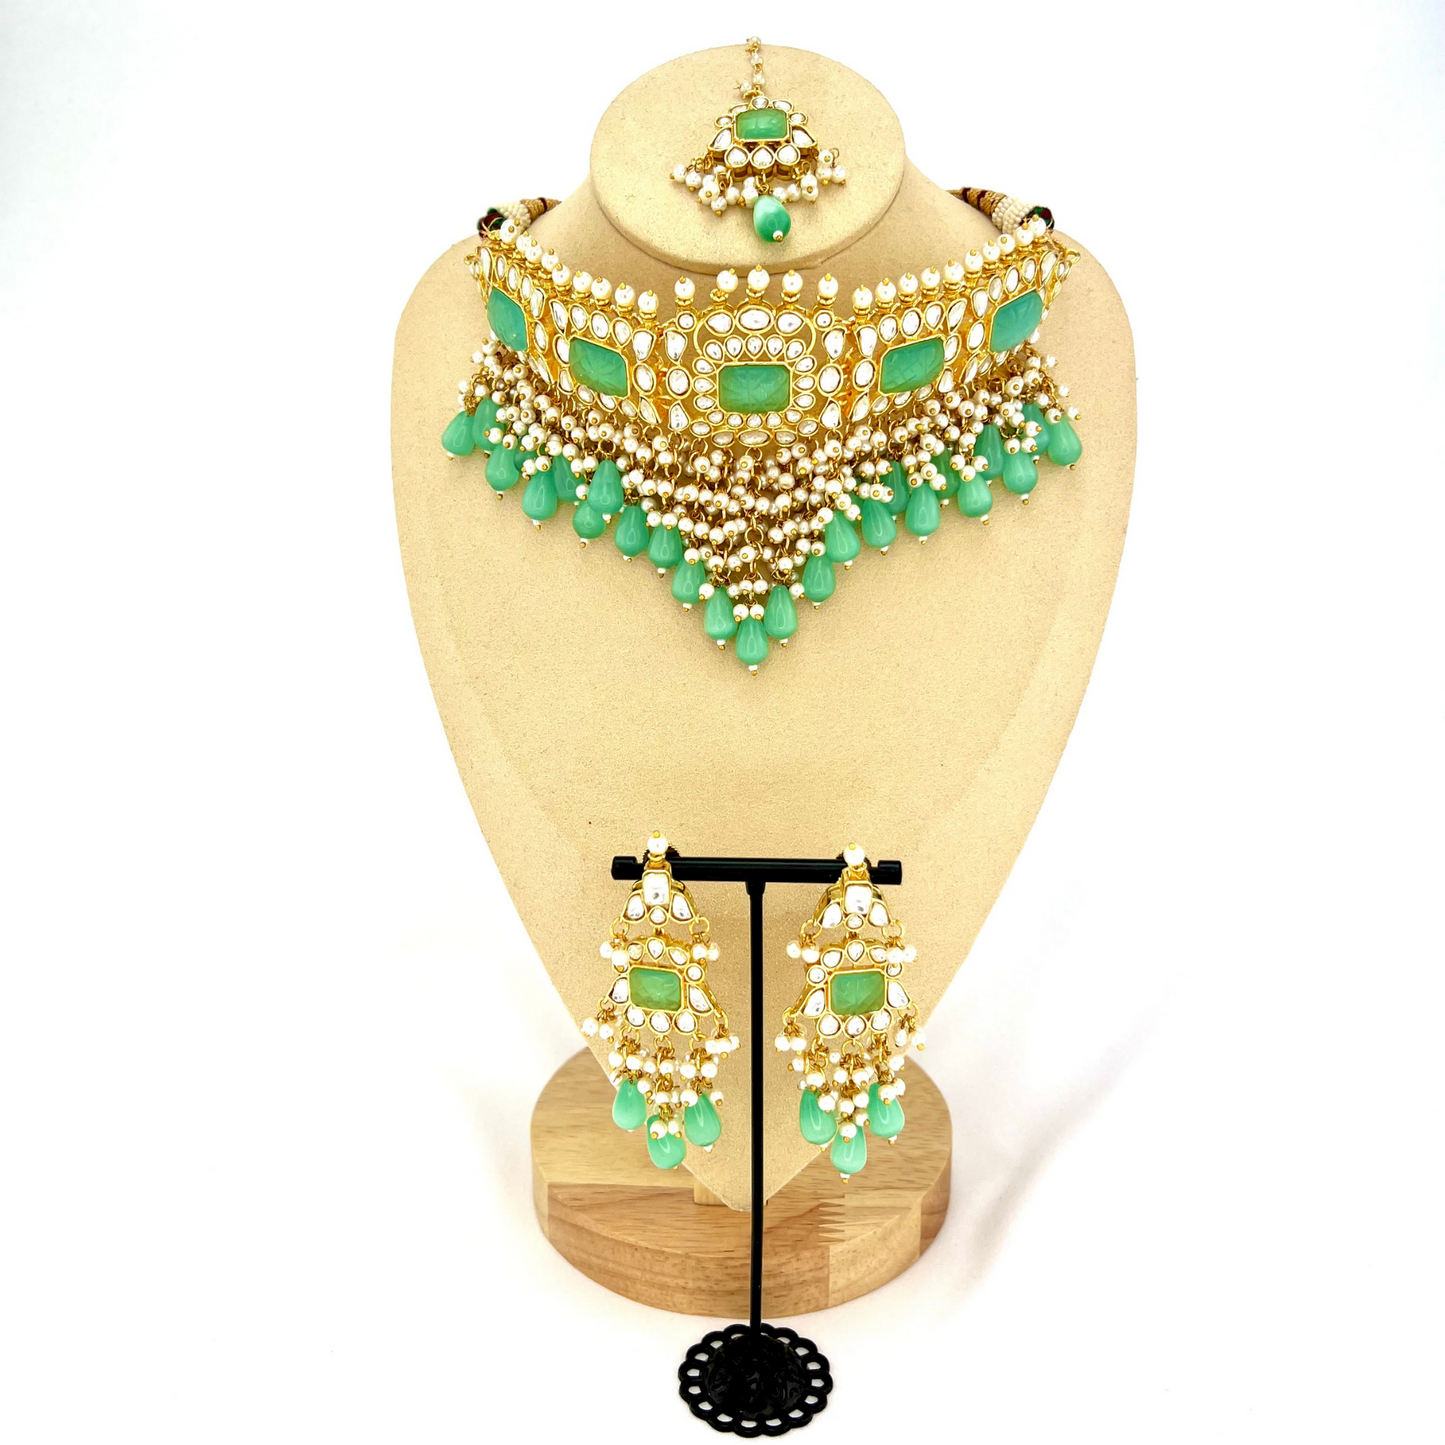 Necklace set with turquoise beads and stones, finished with small white pearls.  Set includes necklace, tikka and earrings.  Prefect for Indian weddings, parties and special occasions.  Latest 2022 fashion. High end Indian fashion jewellery with top quality stones and beads.